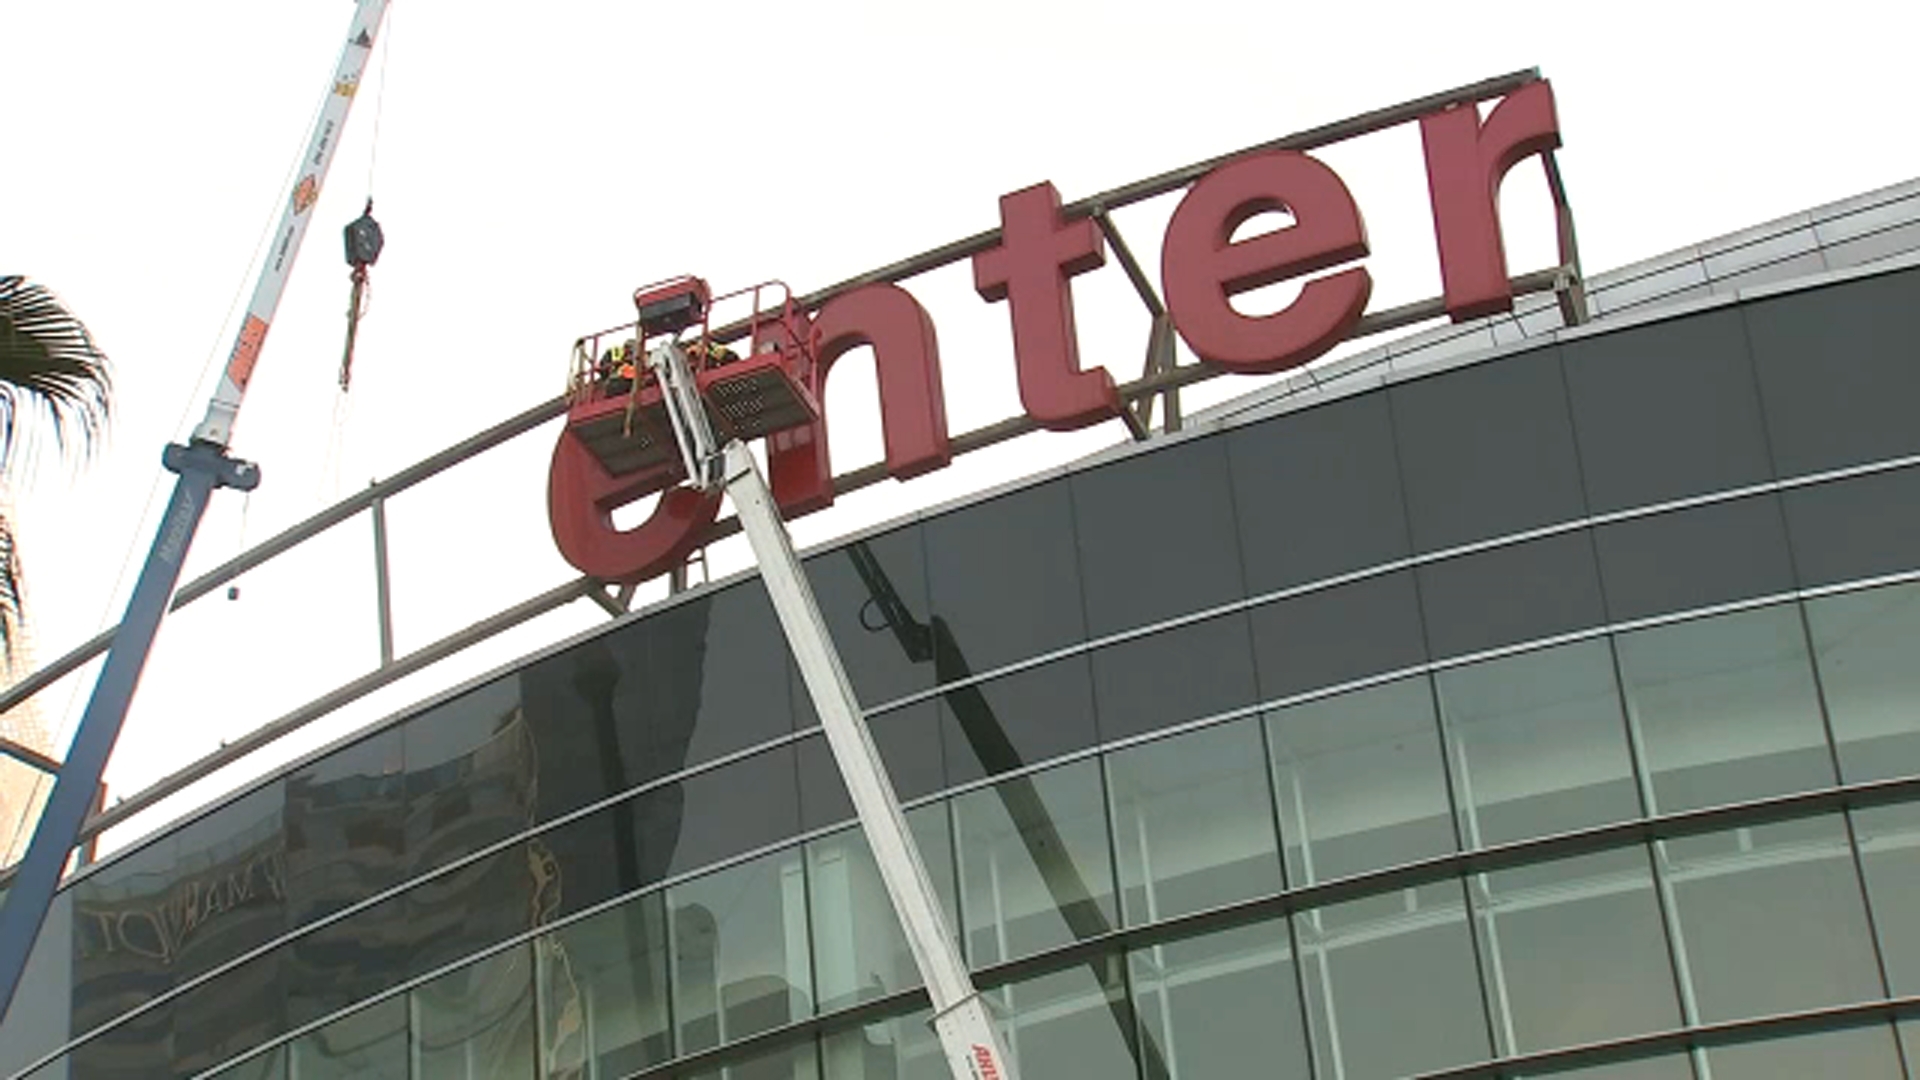 Staples Center Signage Removed Ahead of Name Change to Crypto.com Arena